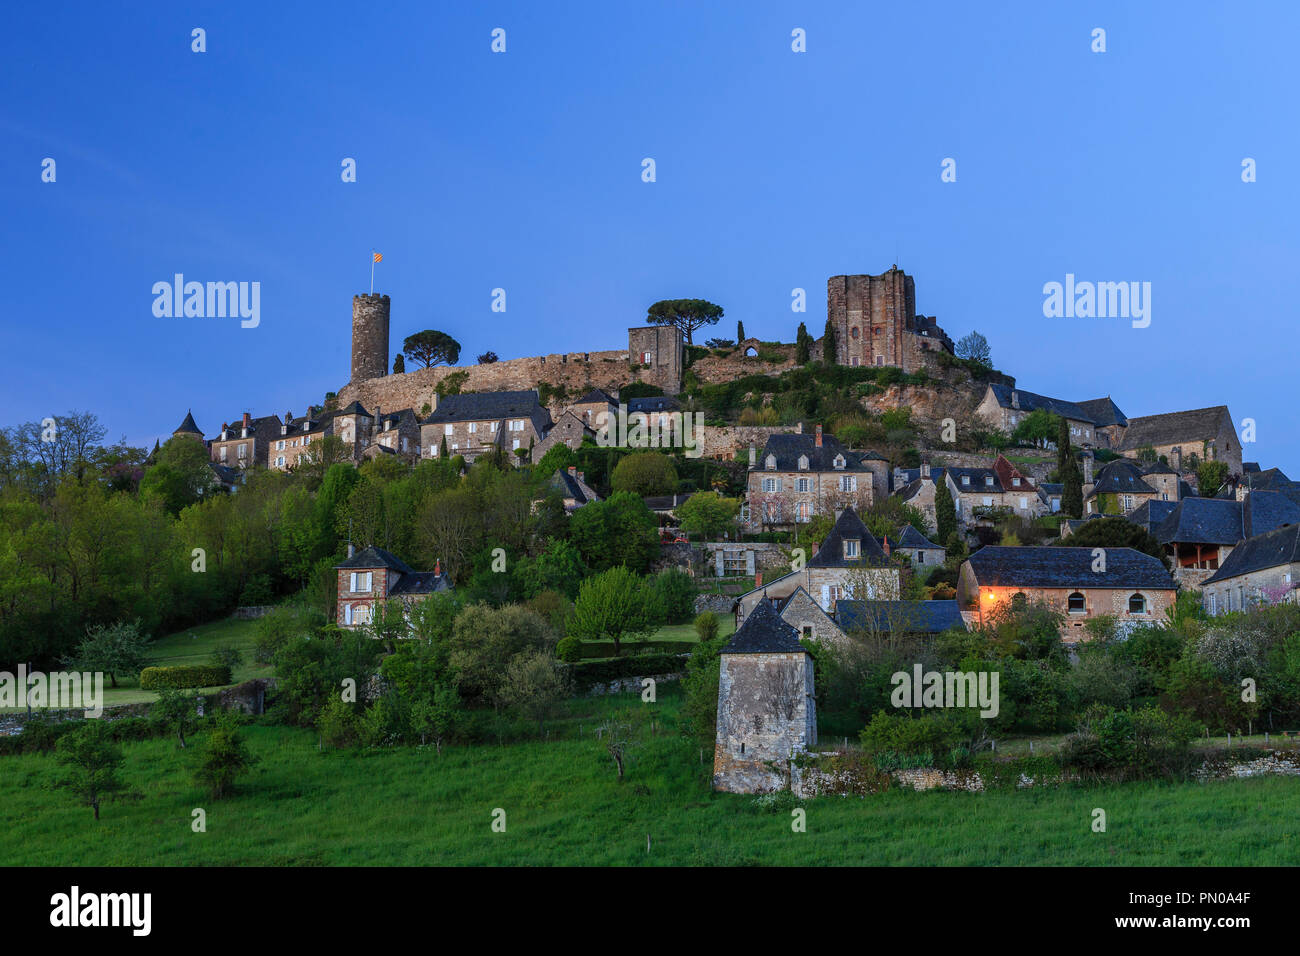 France, Correze, Turenne, labelled Les Plus Beaux Villages de France (The Most Beautiful Villages of France), the village at the evening with Cesar To Stock Photo